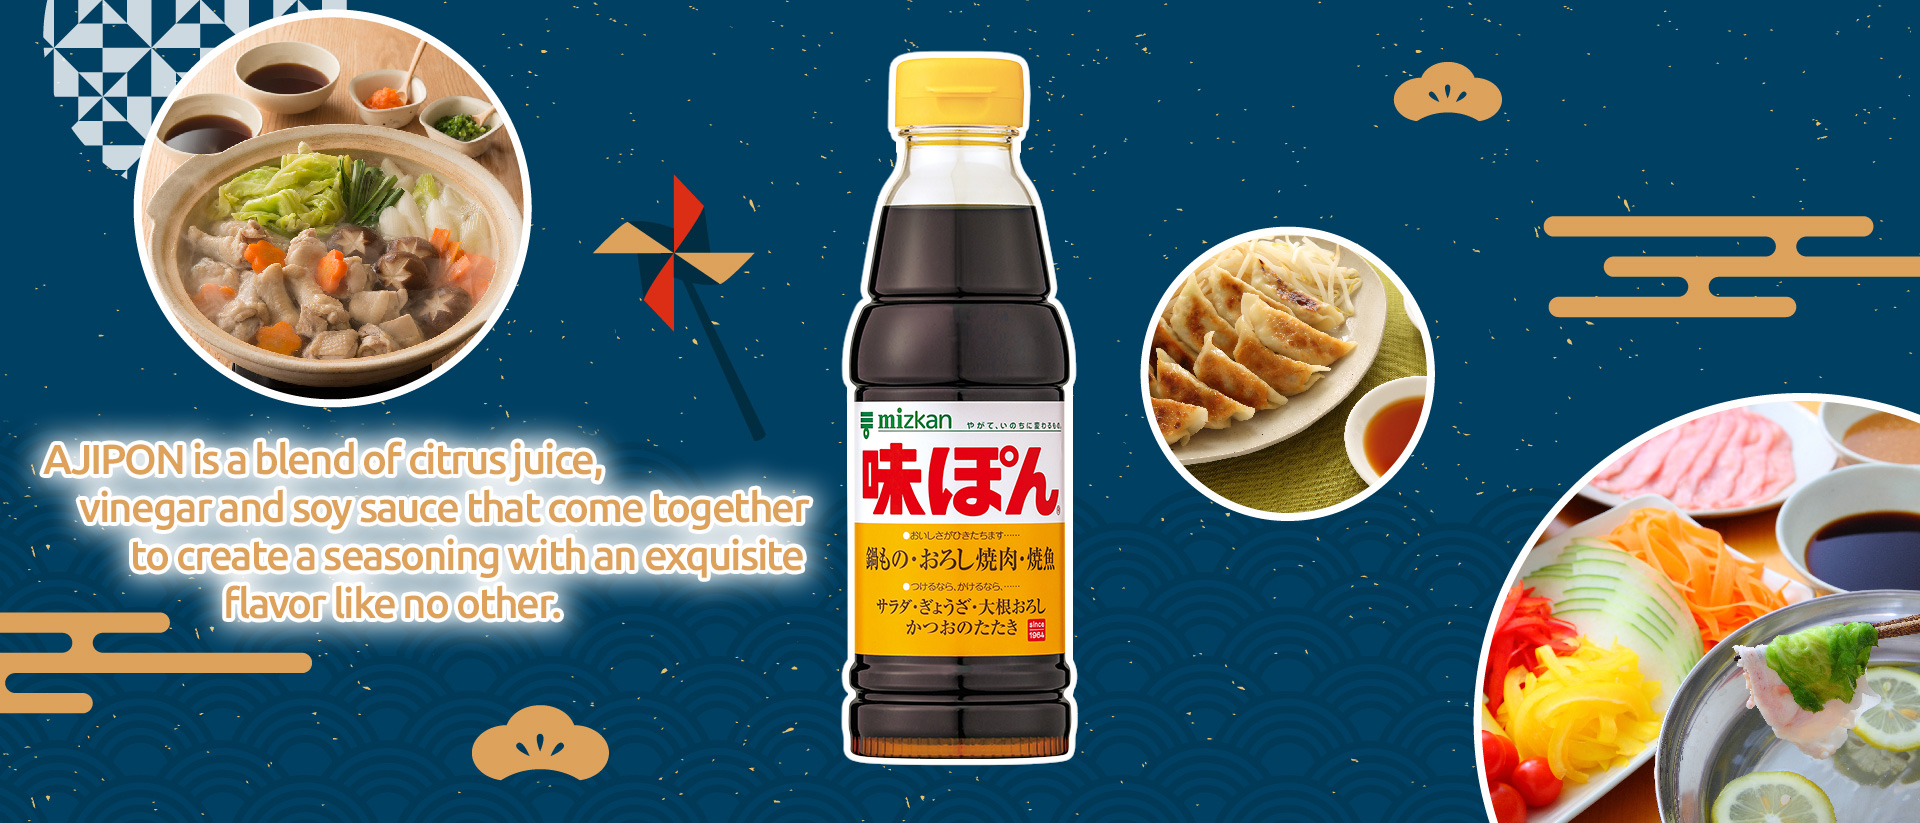 What kind of seasoning is AJIPON? AJIPON is a blend of citrus juice, vinegar and soy sauce that come together to create a seasoning with an exquisite flavor like no other.